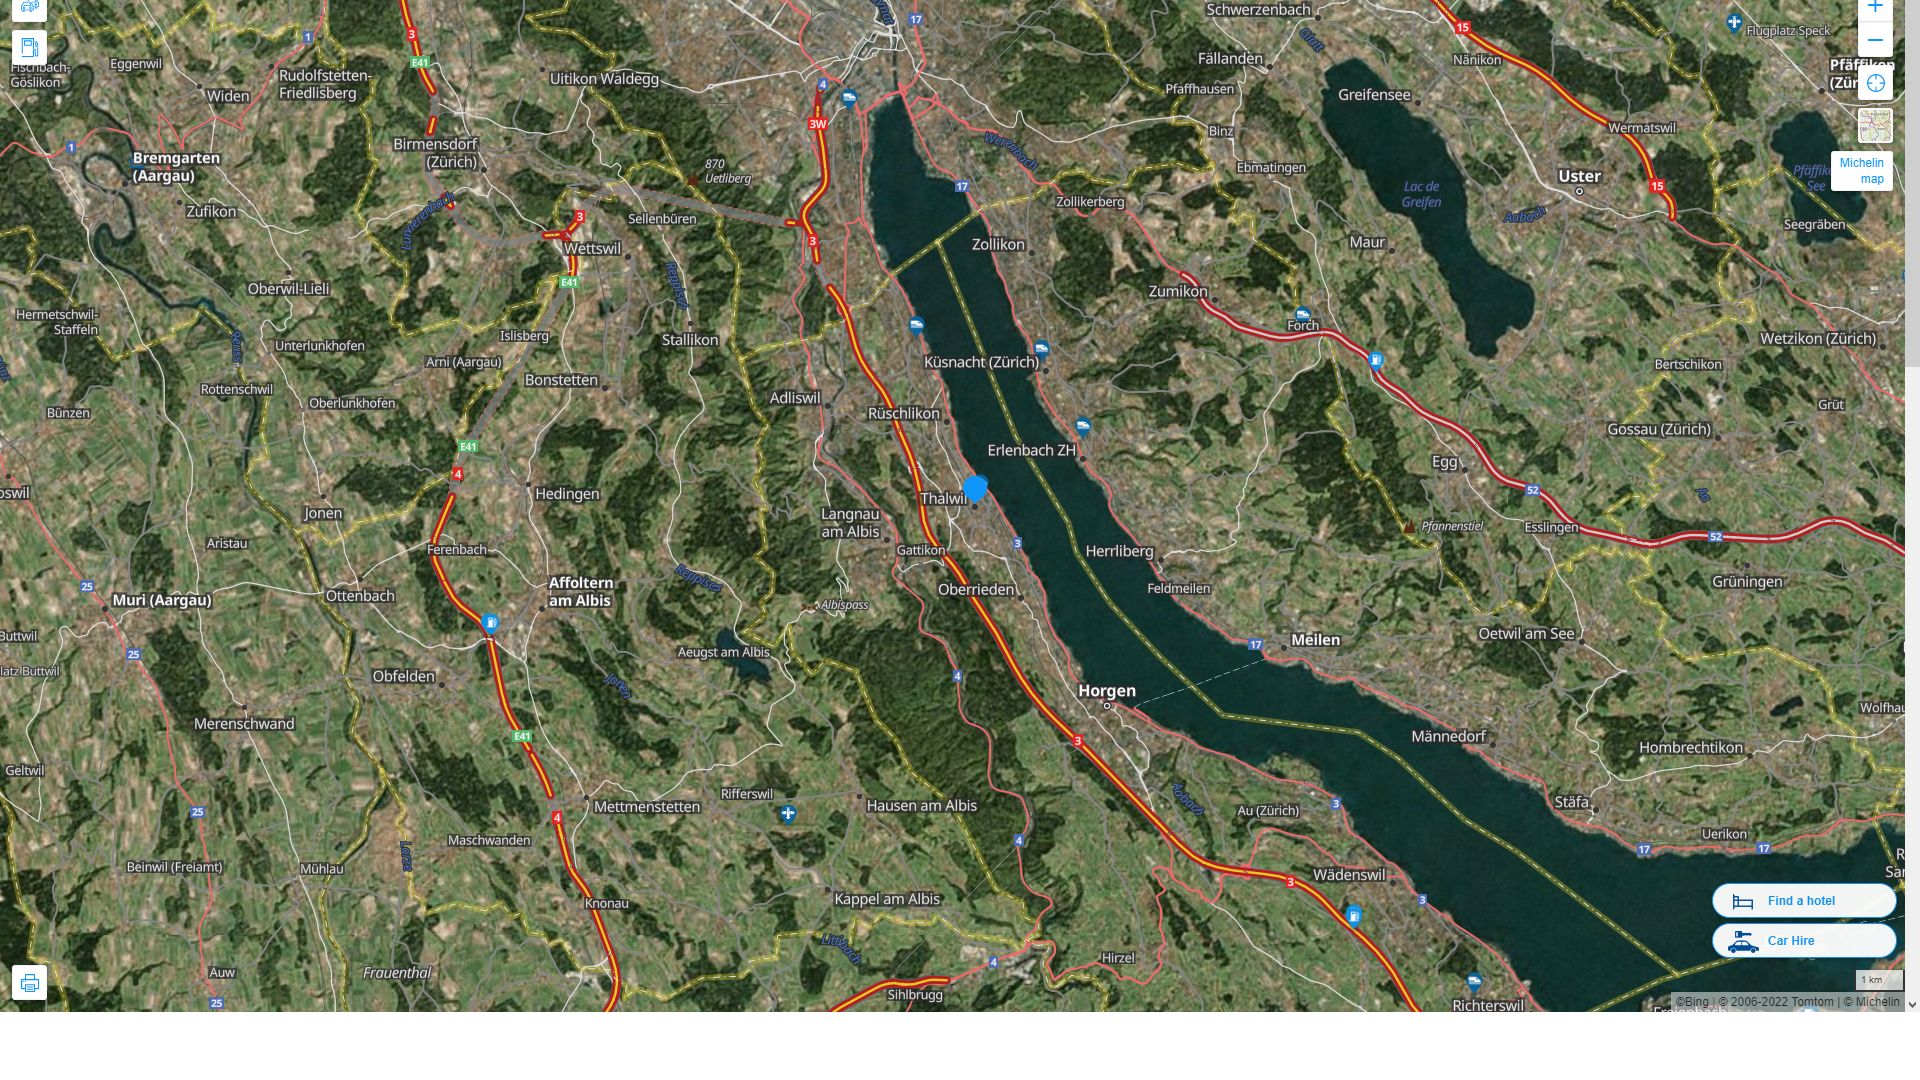 Thalwil Highway and Road Map with Satellite View